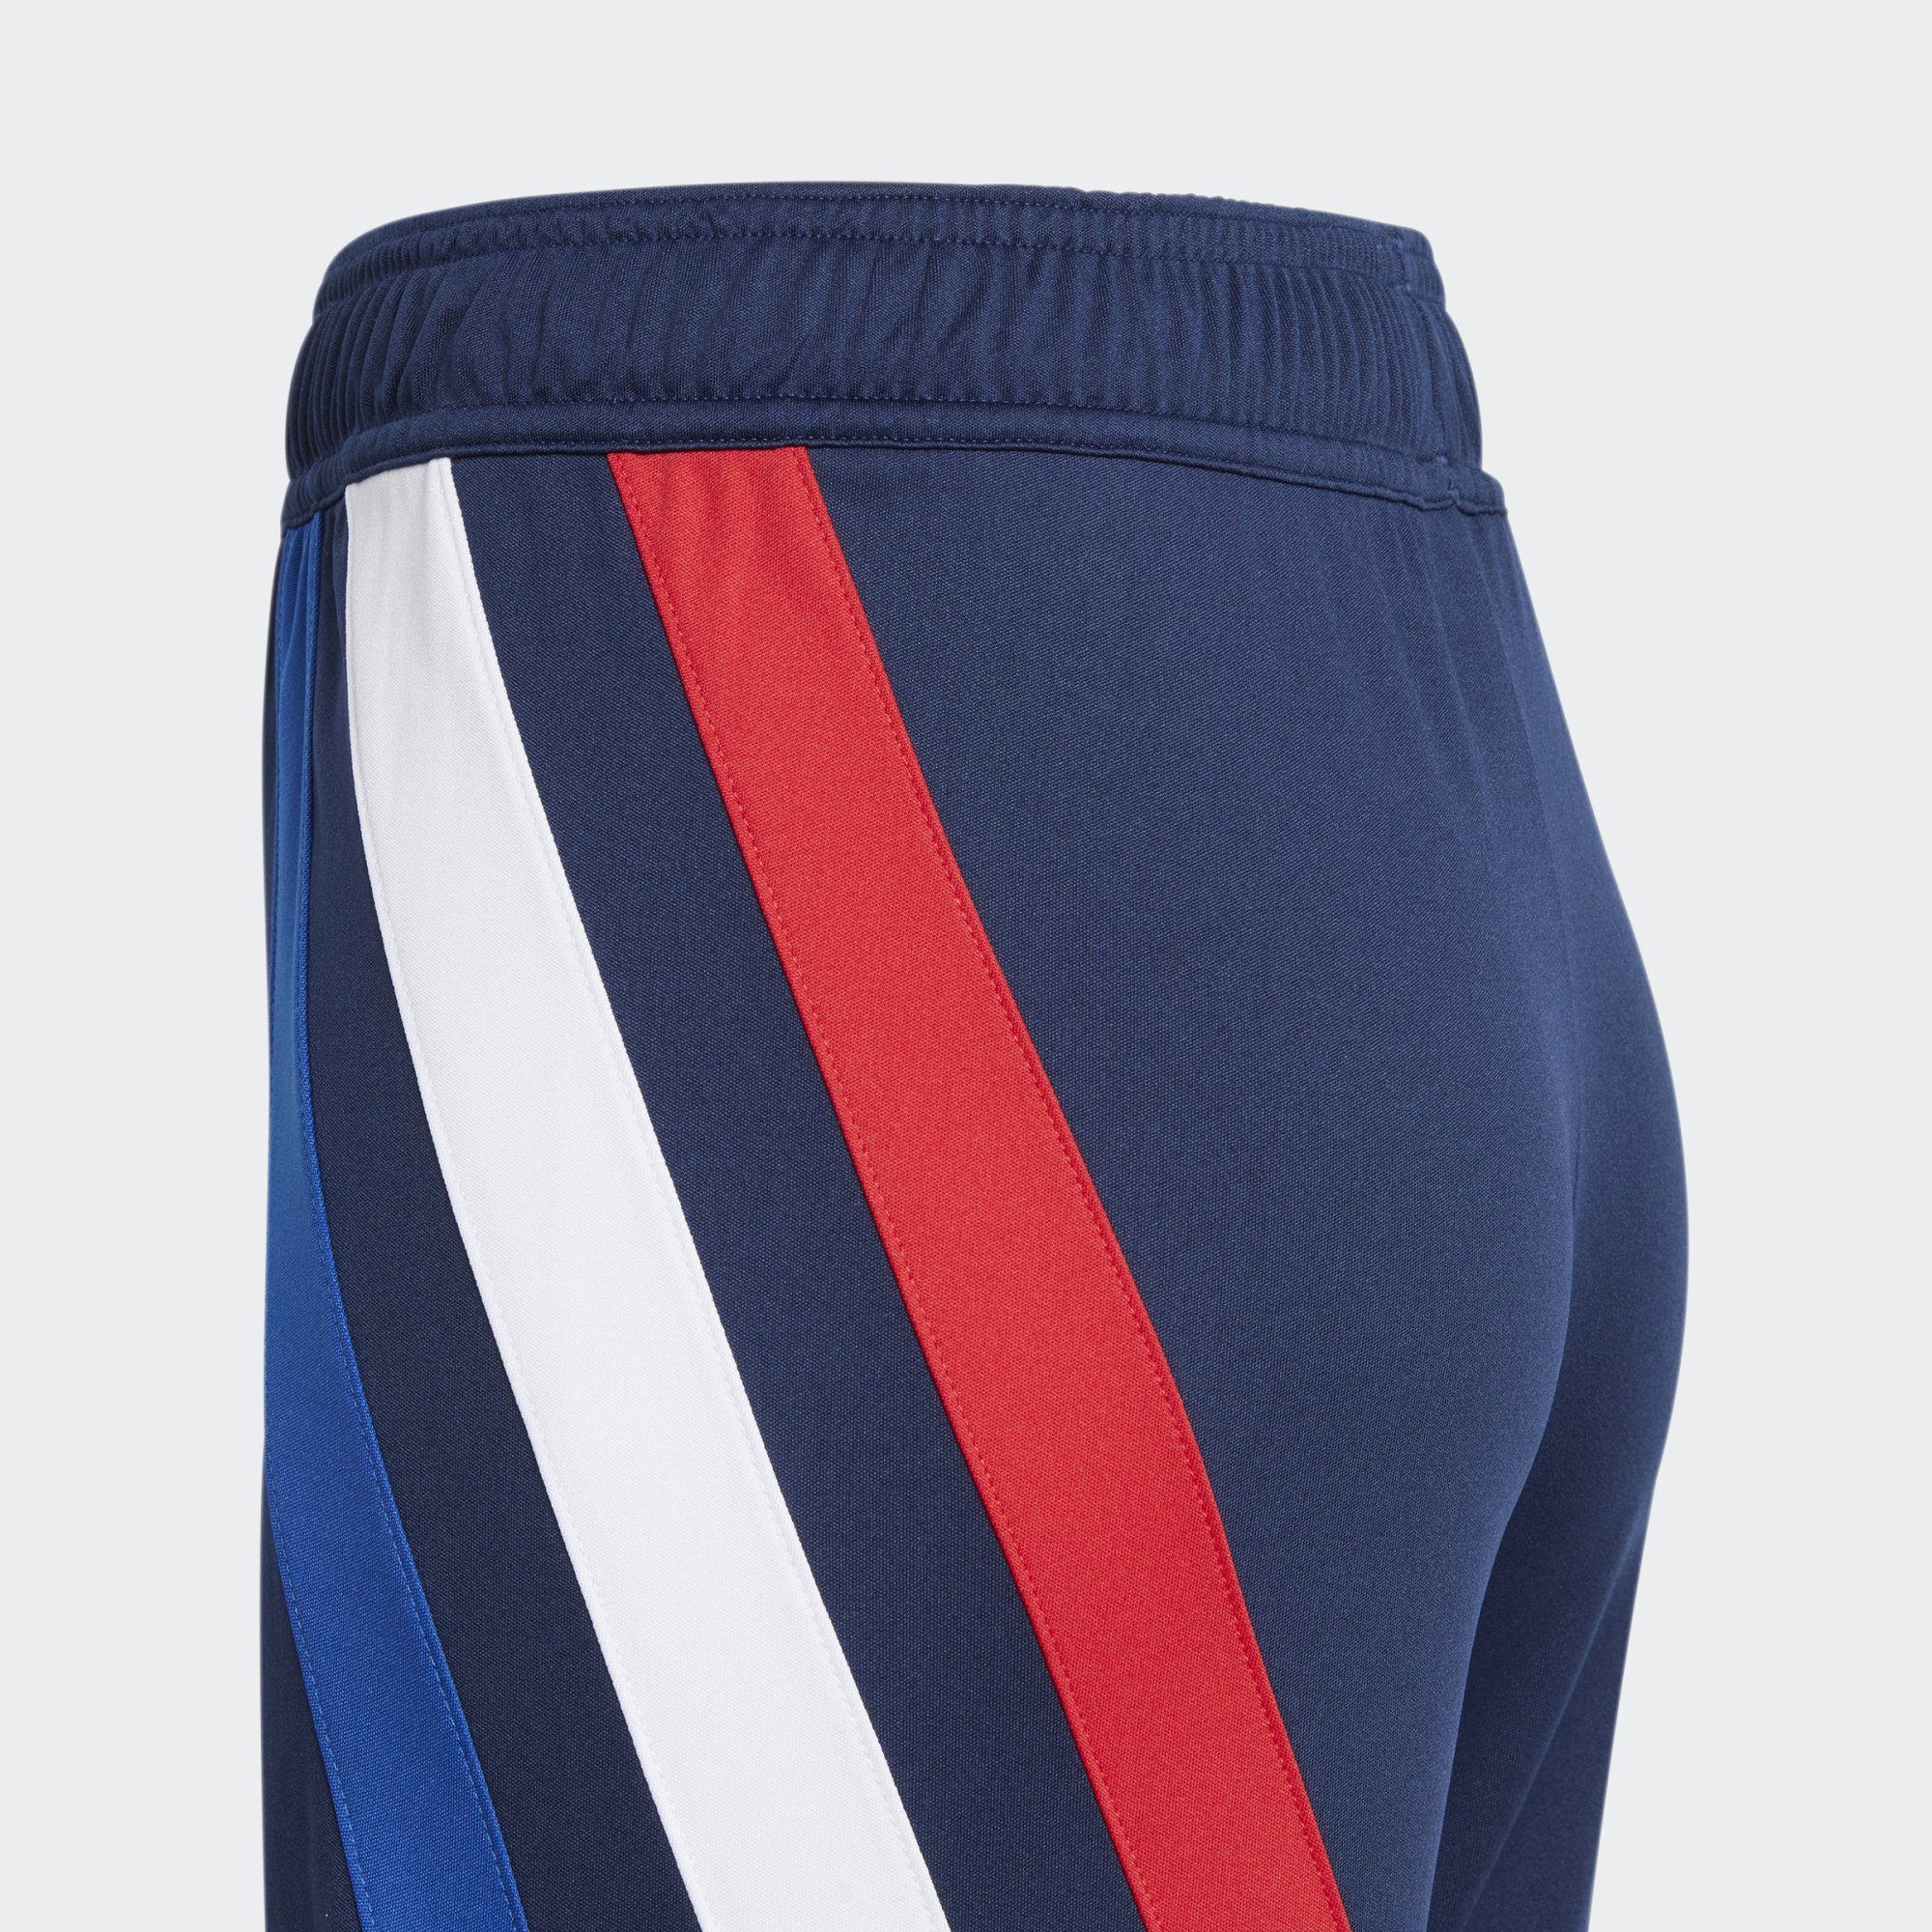 adidas Performance Funktionsshorts Collegiate Blue Navy Red / FORTORE White 2 Team Team Blue Royal 23 / / SHORTS